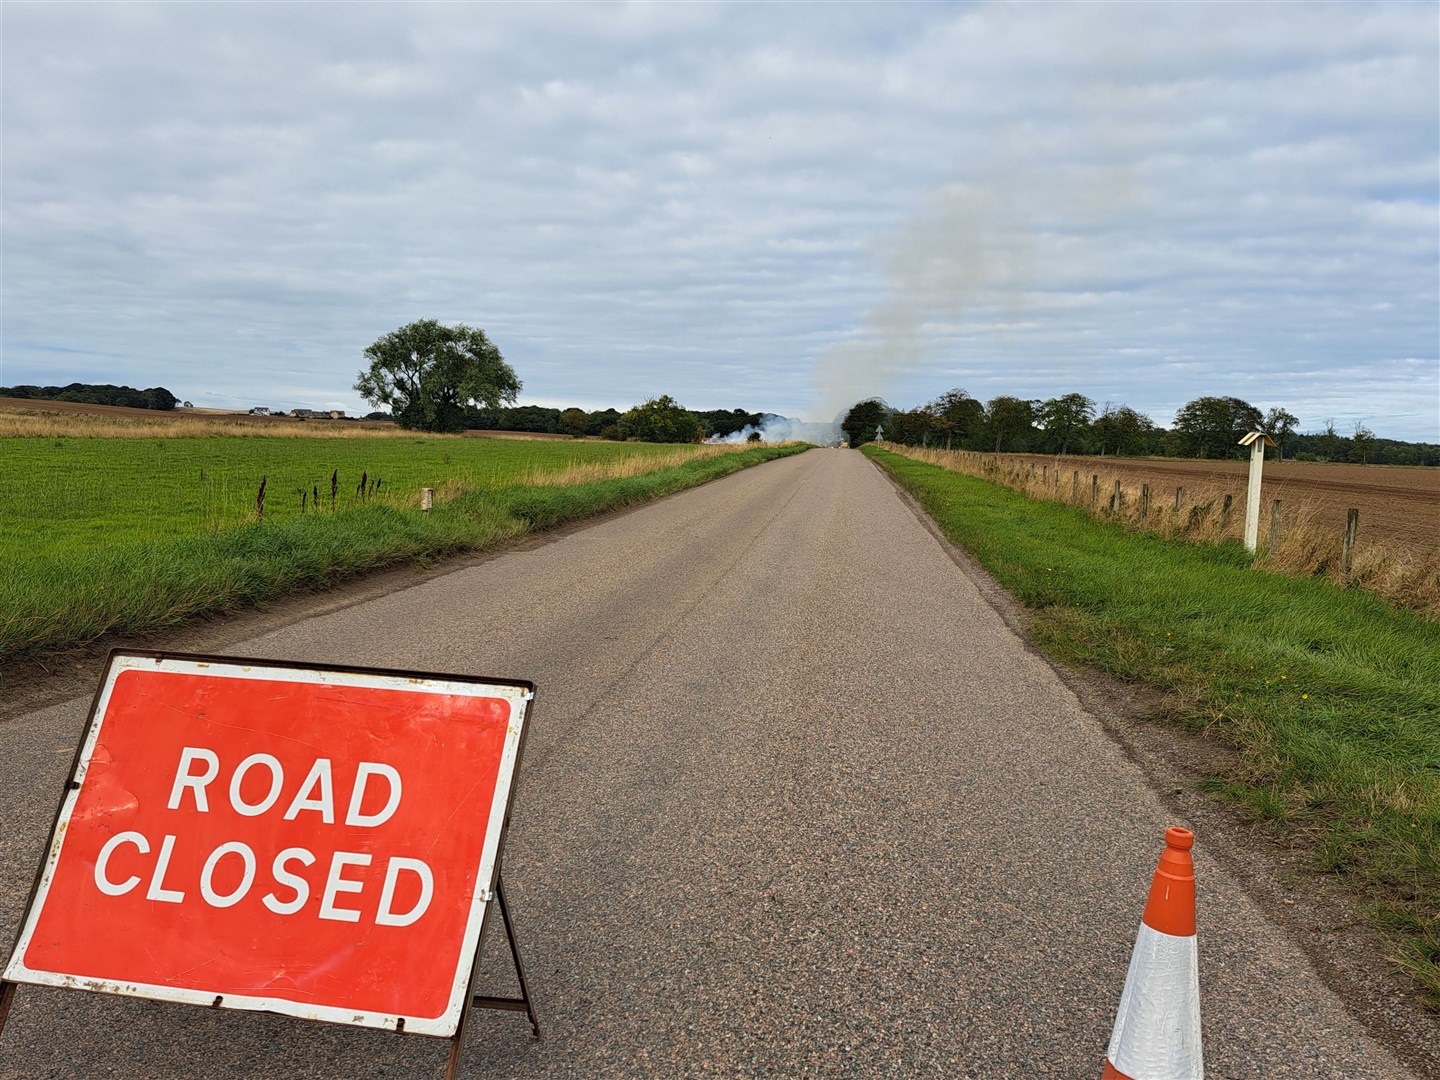 The B9012 road from Crosslots to Hopeman was closed due to the fire.